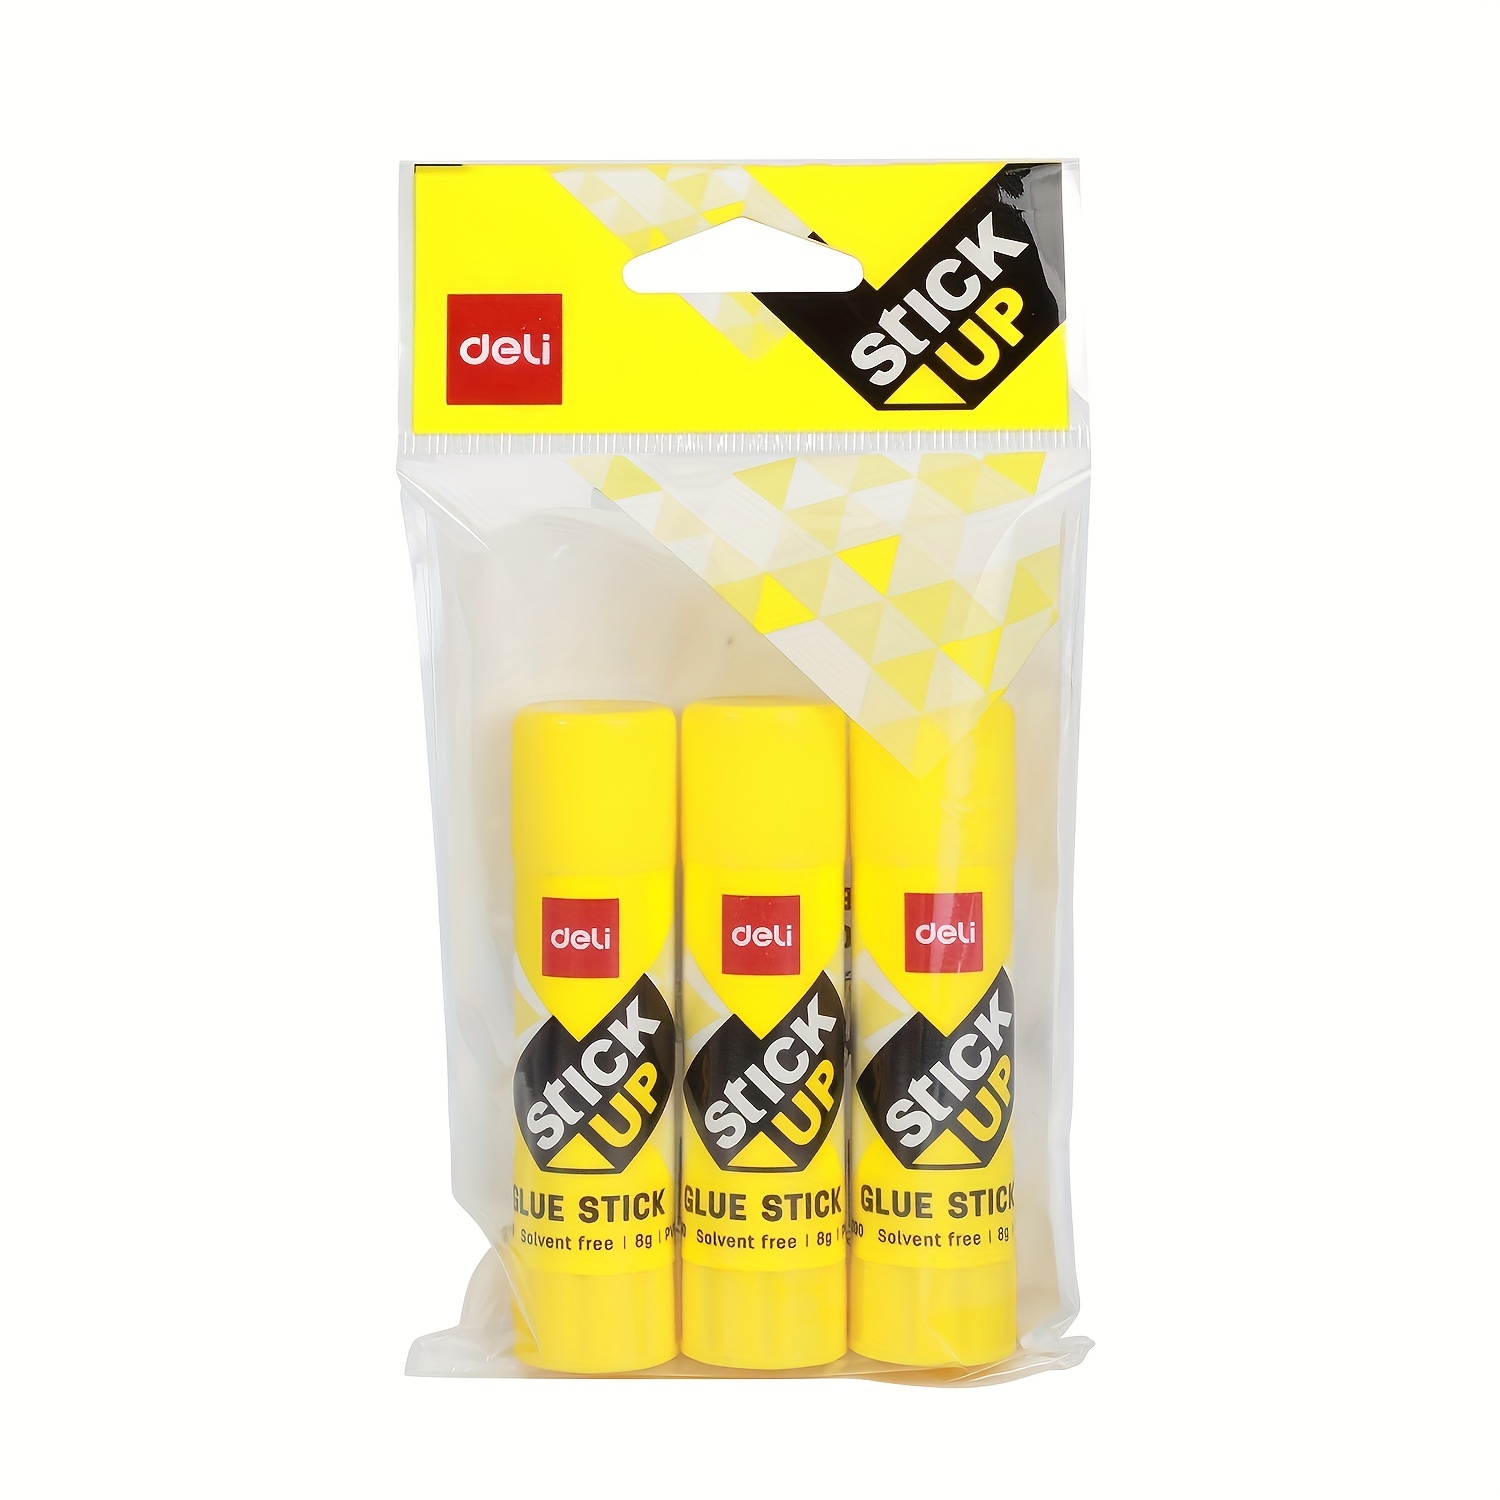 2pcs Random Color Fruit Scented Glue Sticks, Perfect For Student Crafting